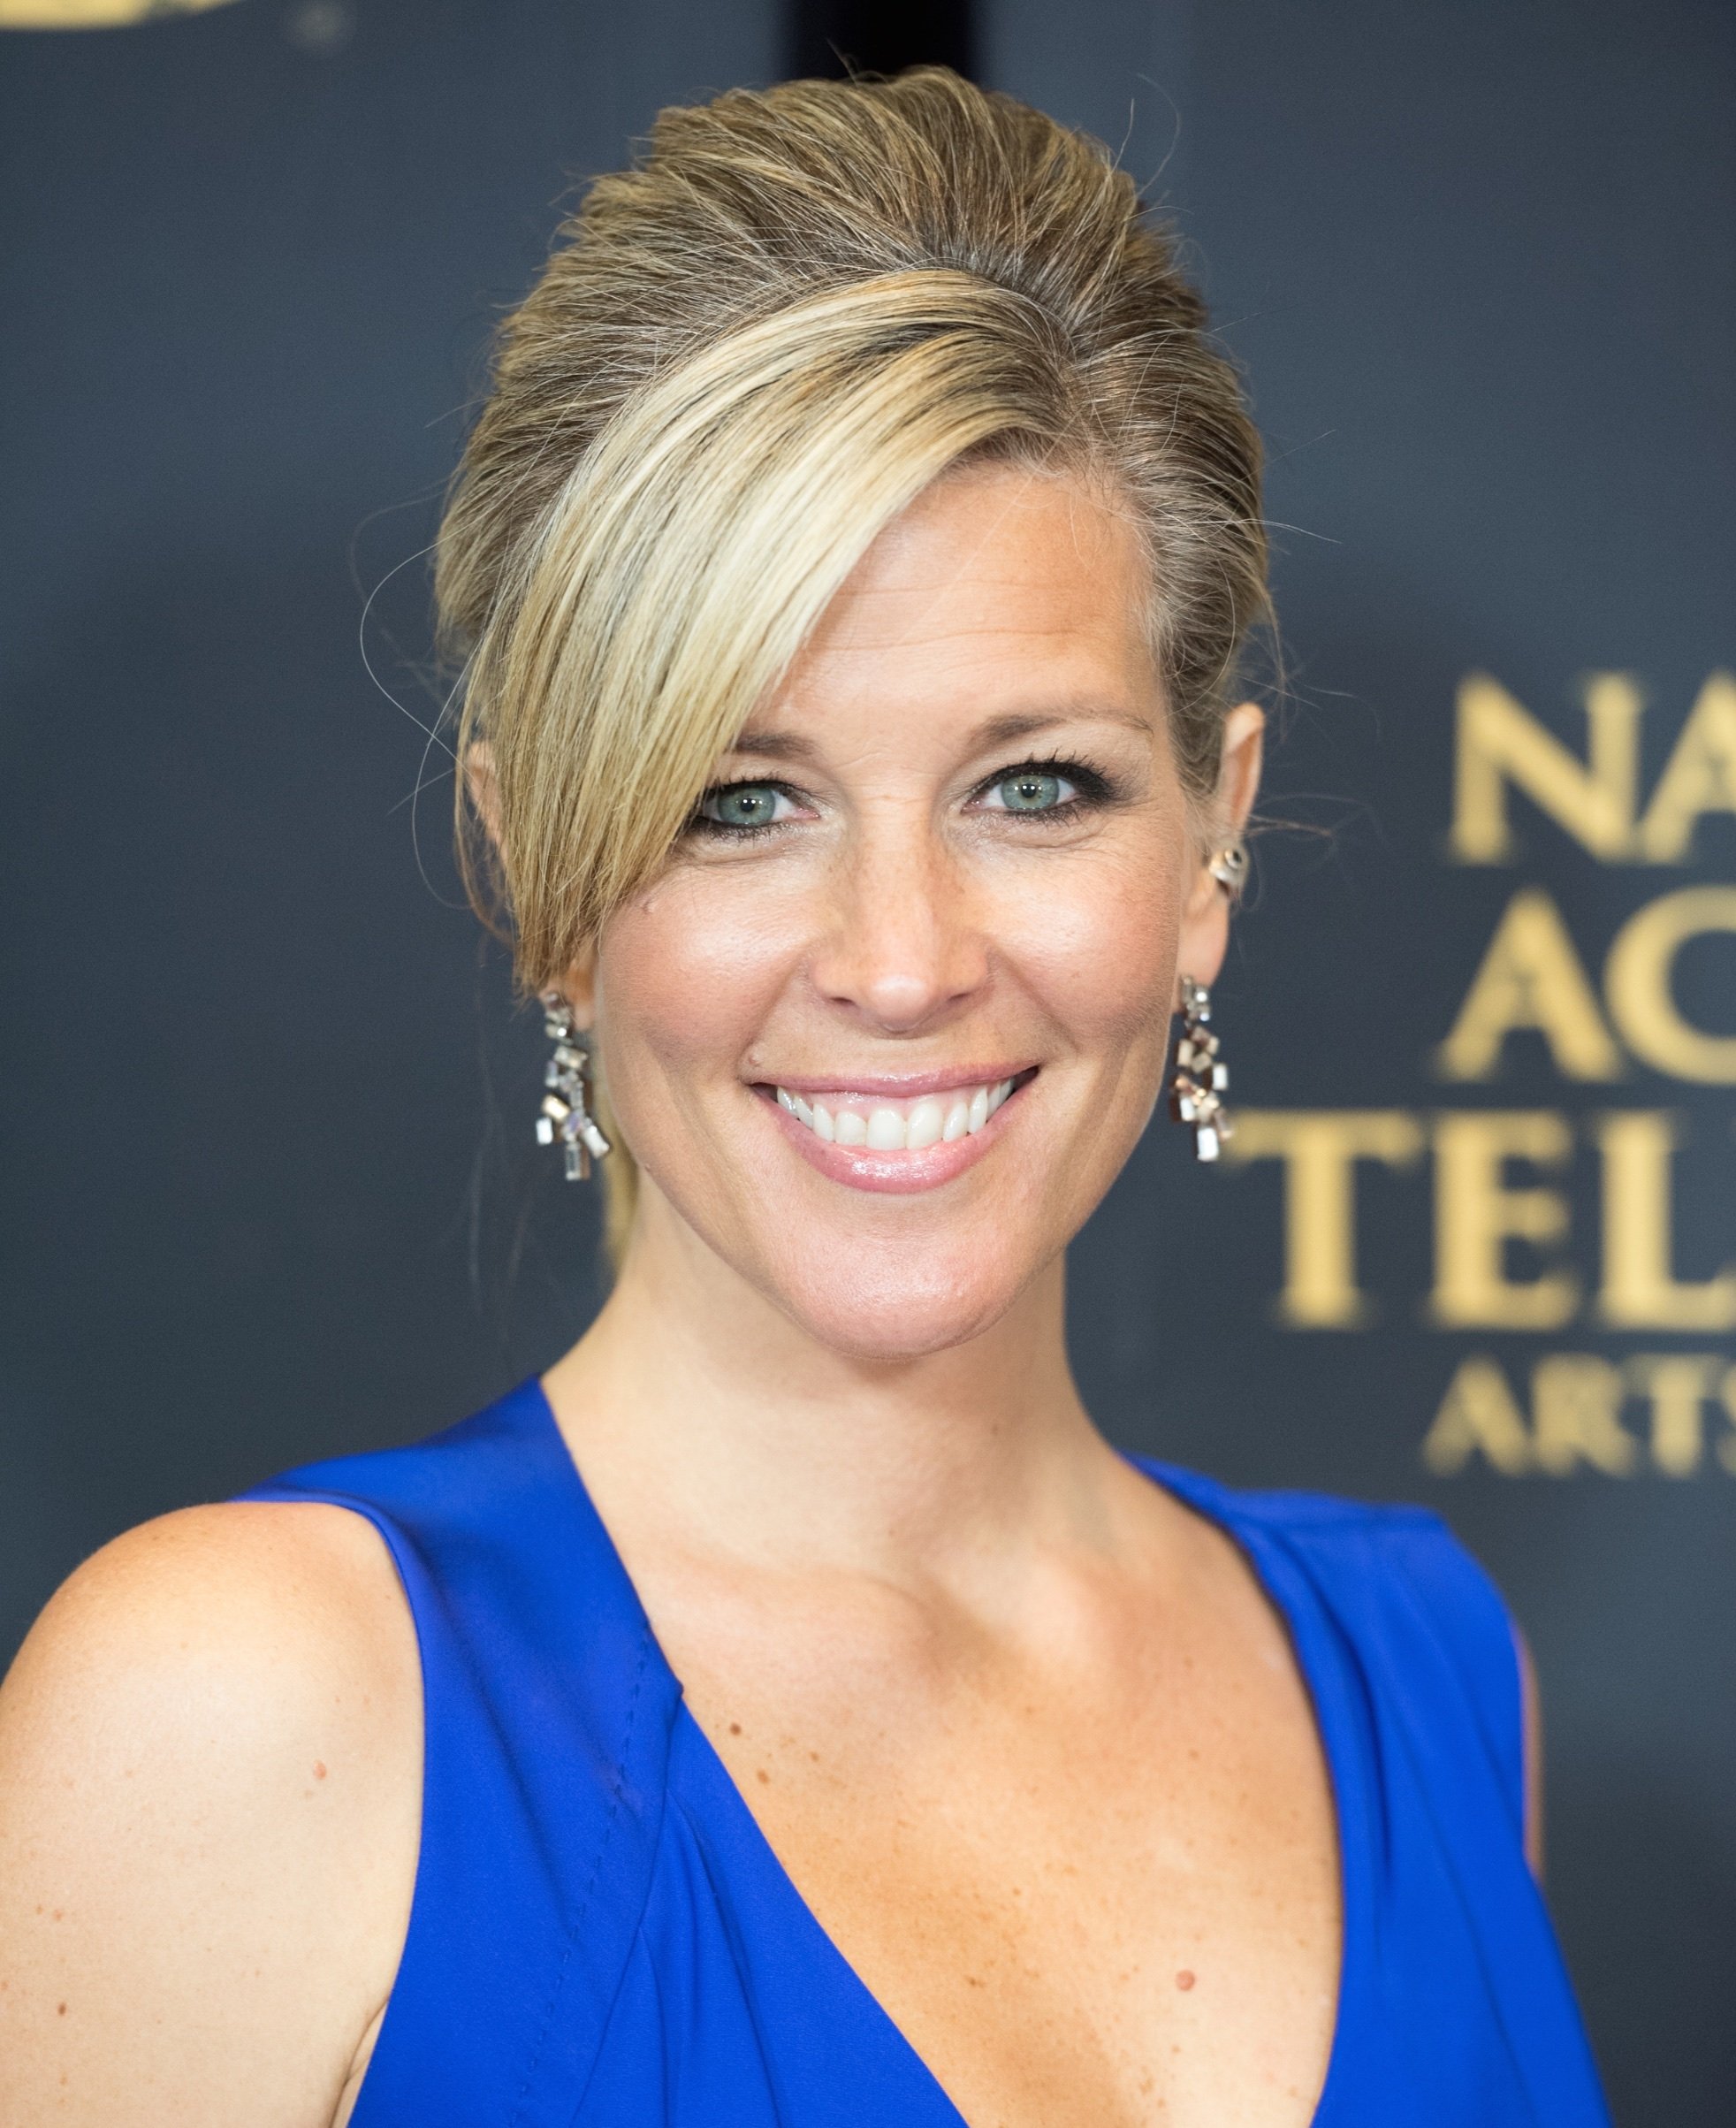 'General Hospital' star Laura Wright in a blue dress; poses on the red carpet.